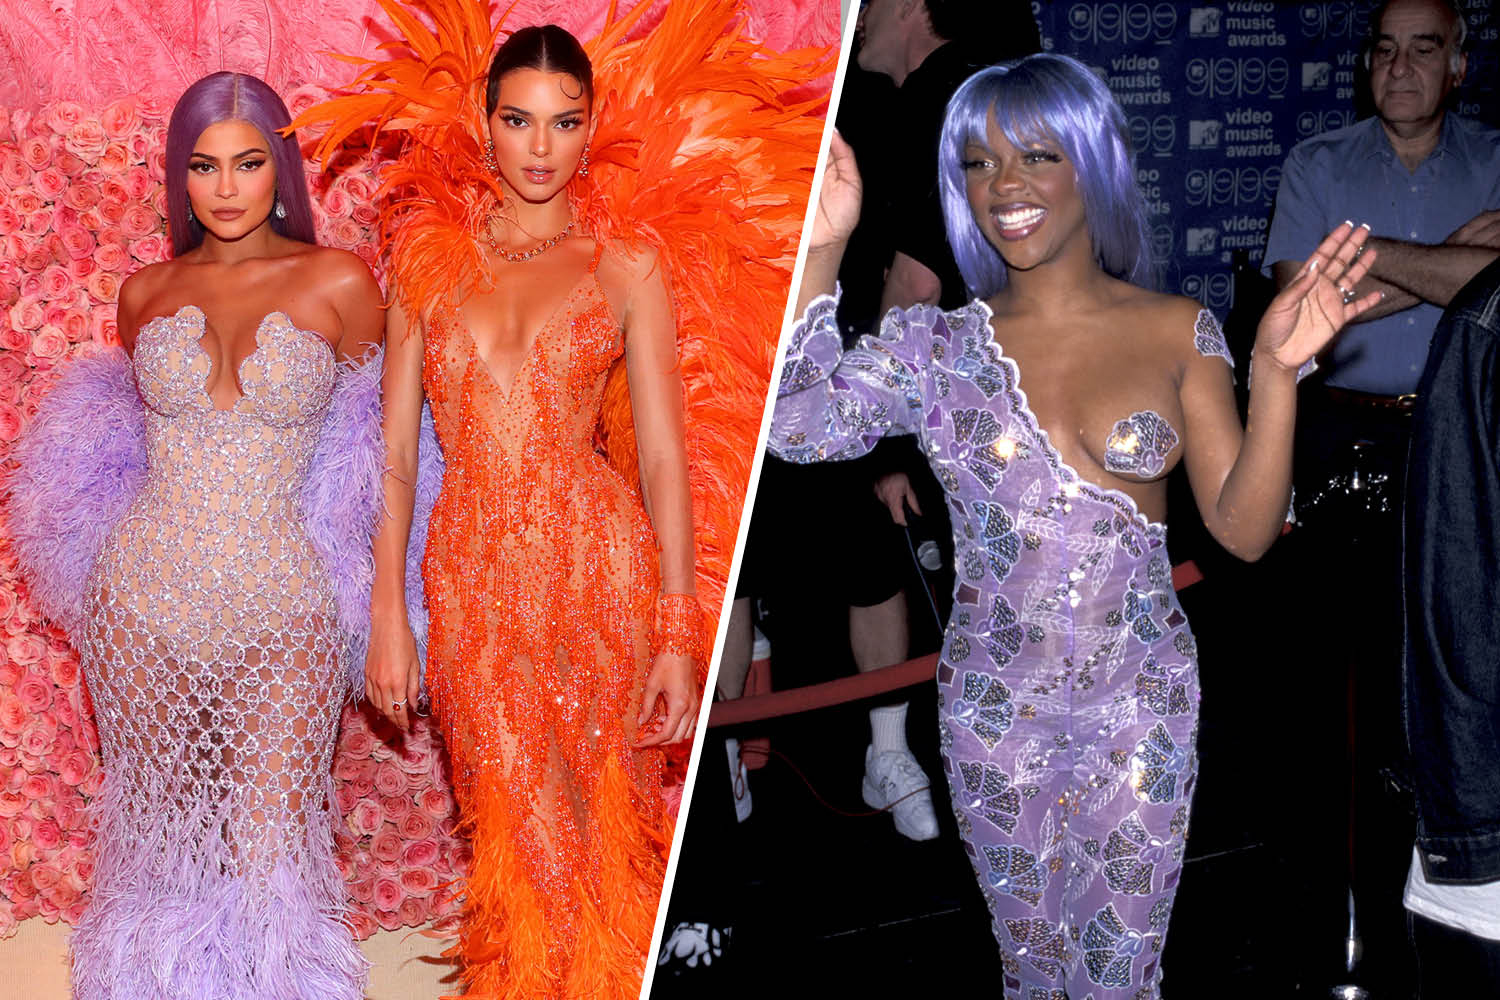 Kendall and Kylie Jenner at the 2019 Met Gala and Lil Kim at the 1999 VMAs